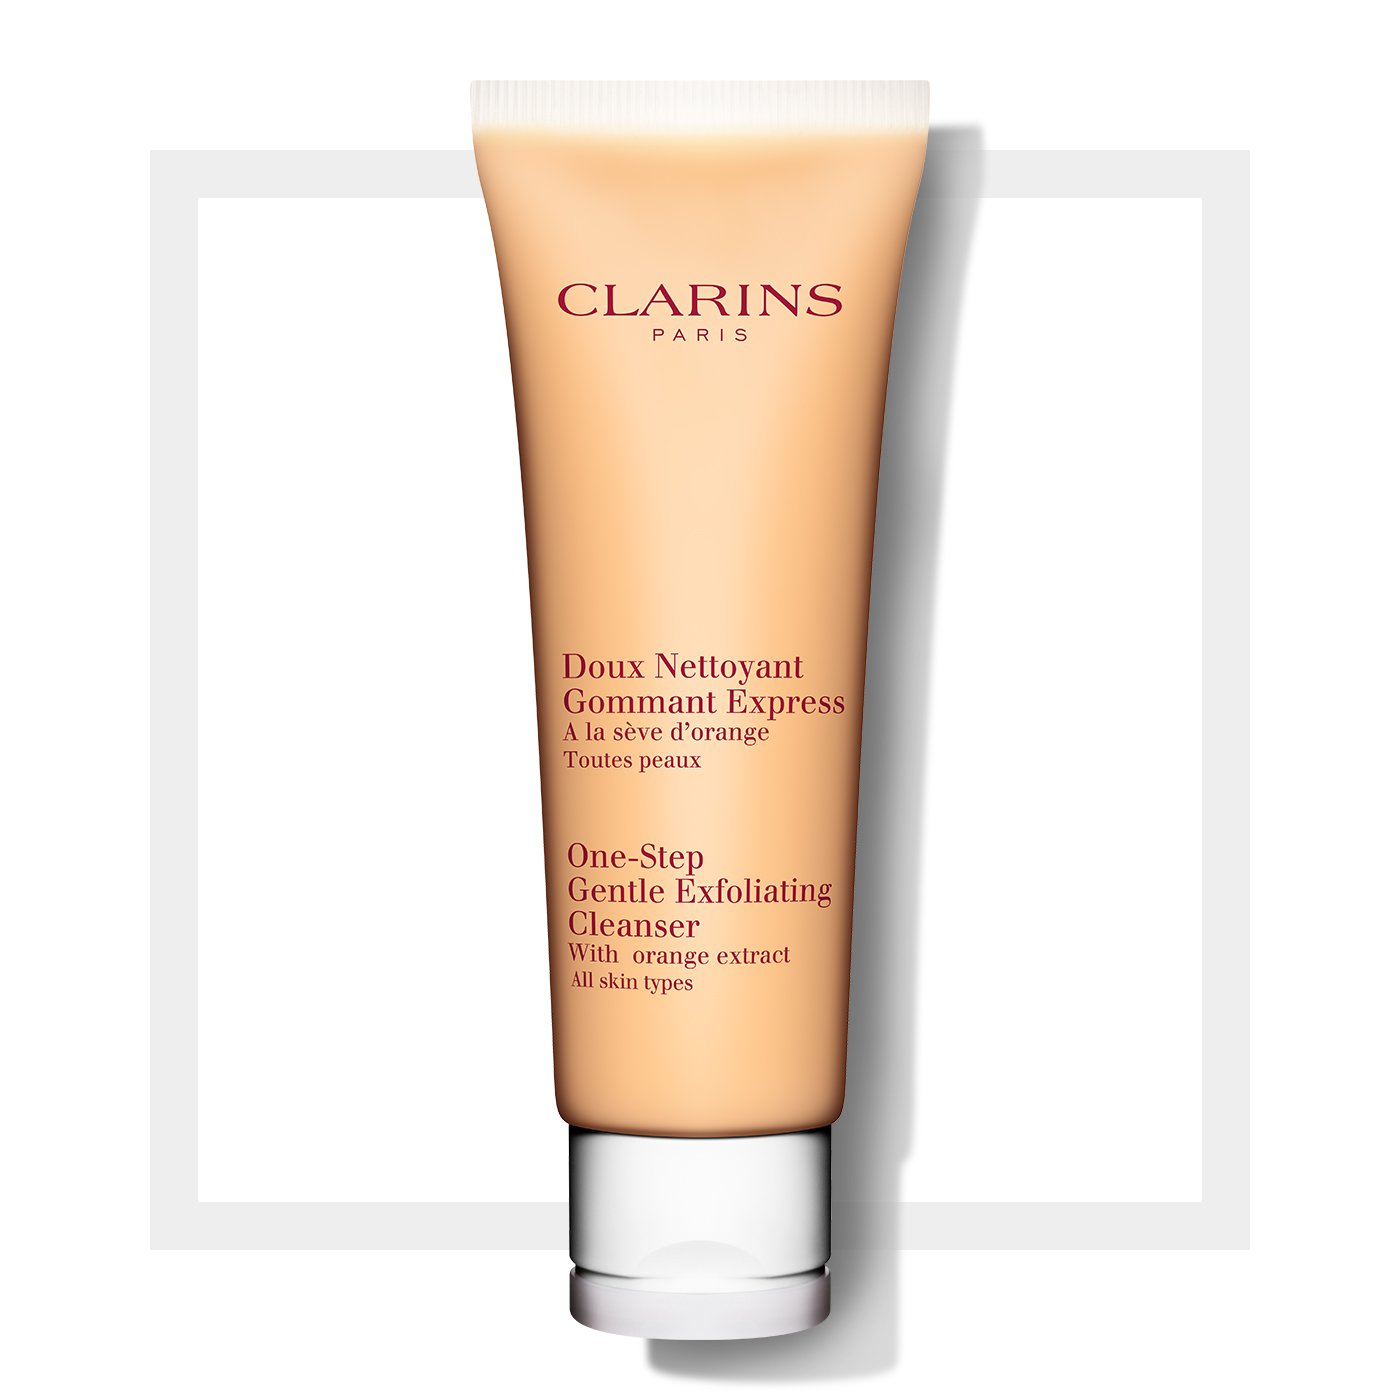 Clarins-One-Step-Gentle-Exfoliating-Cleanser-With-Orange-Extract